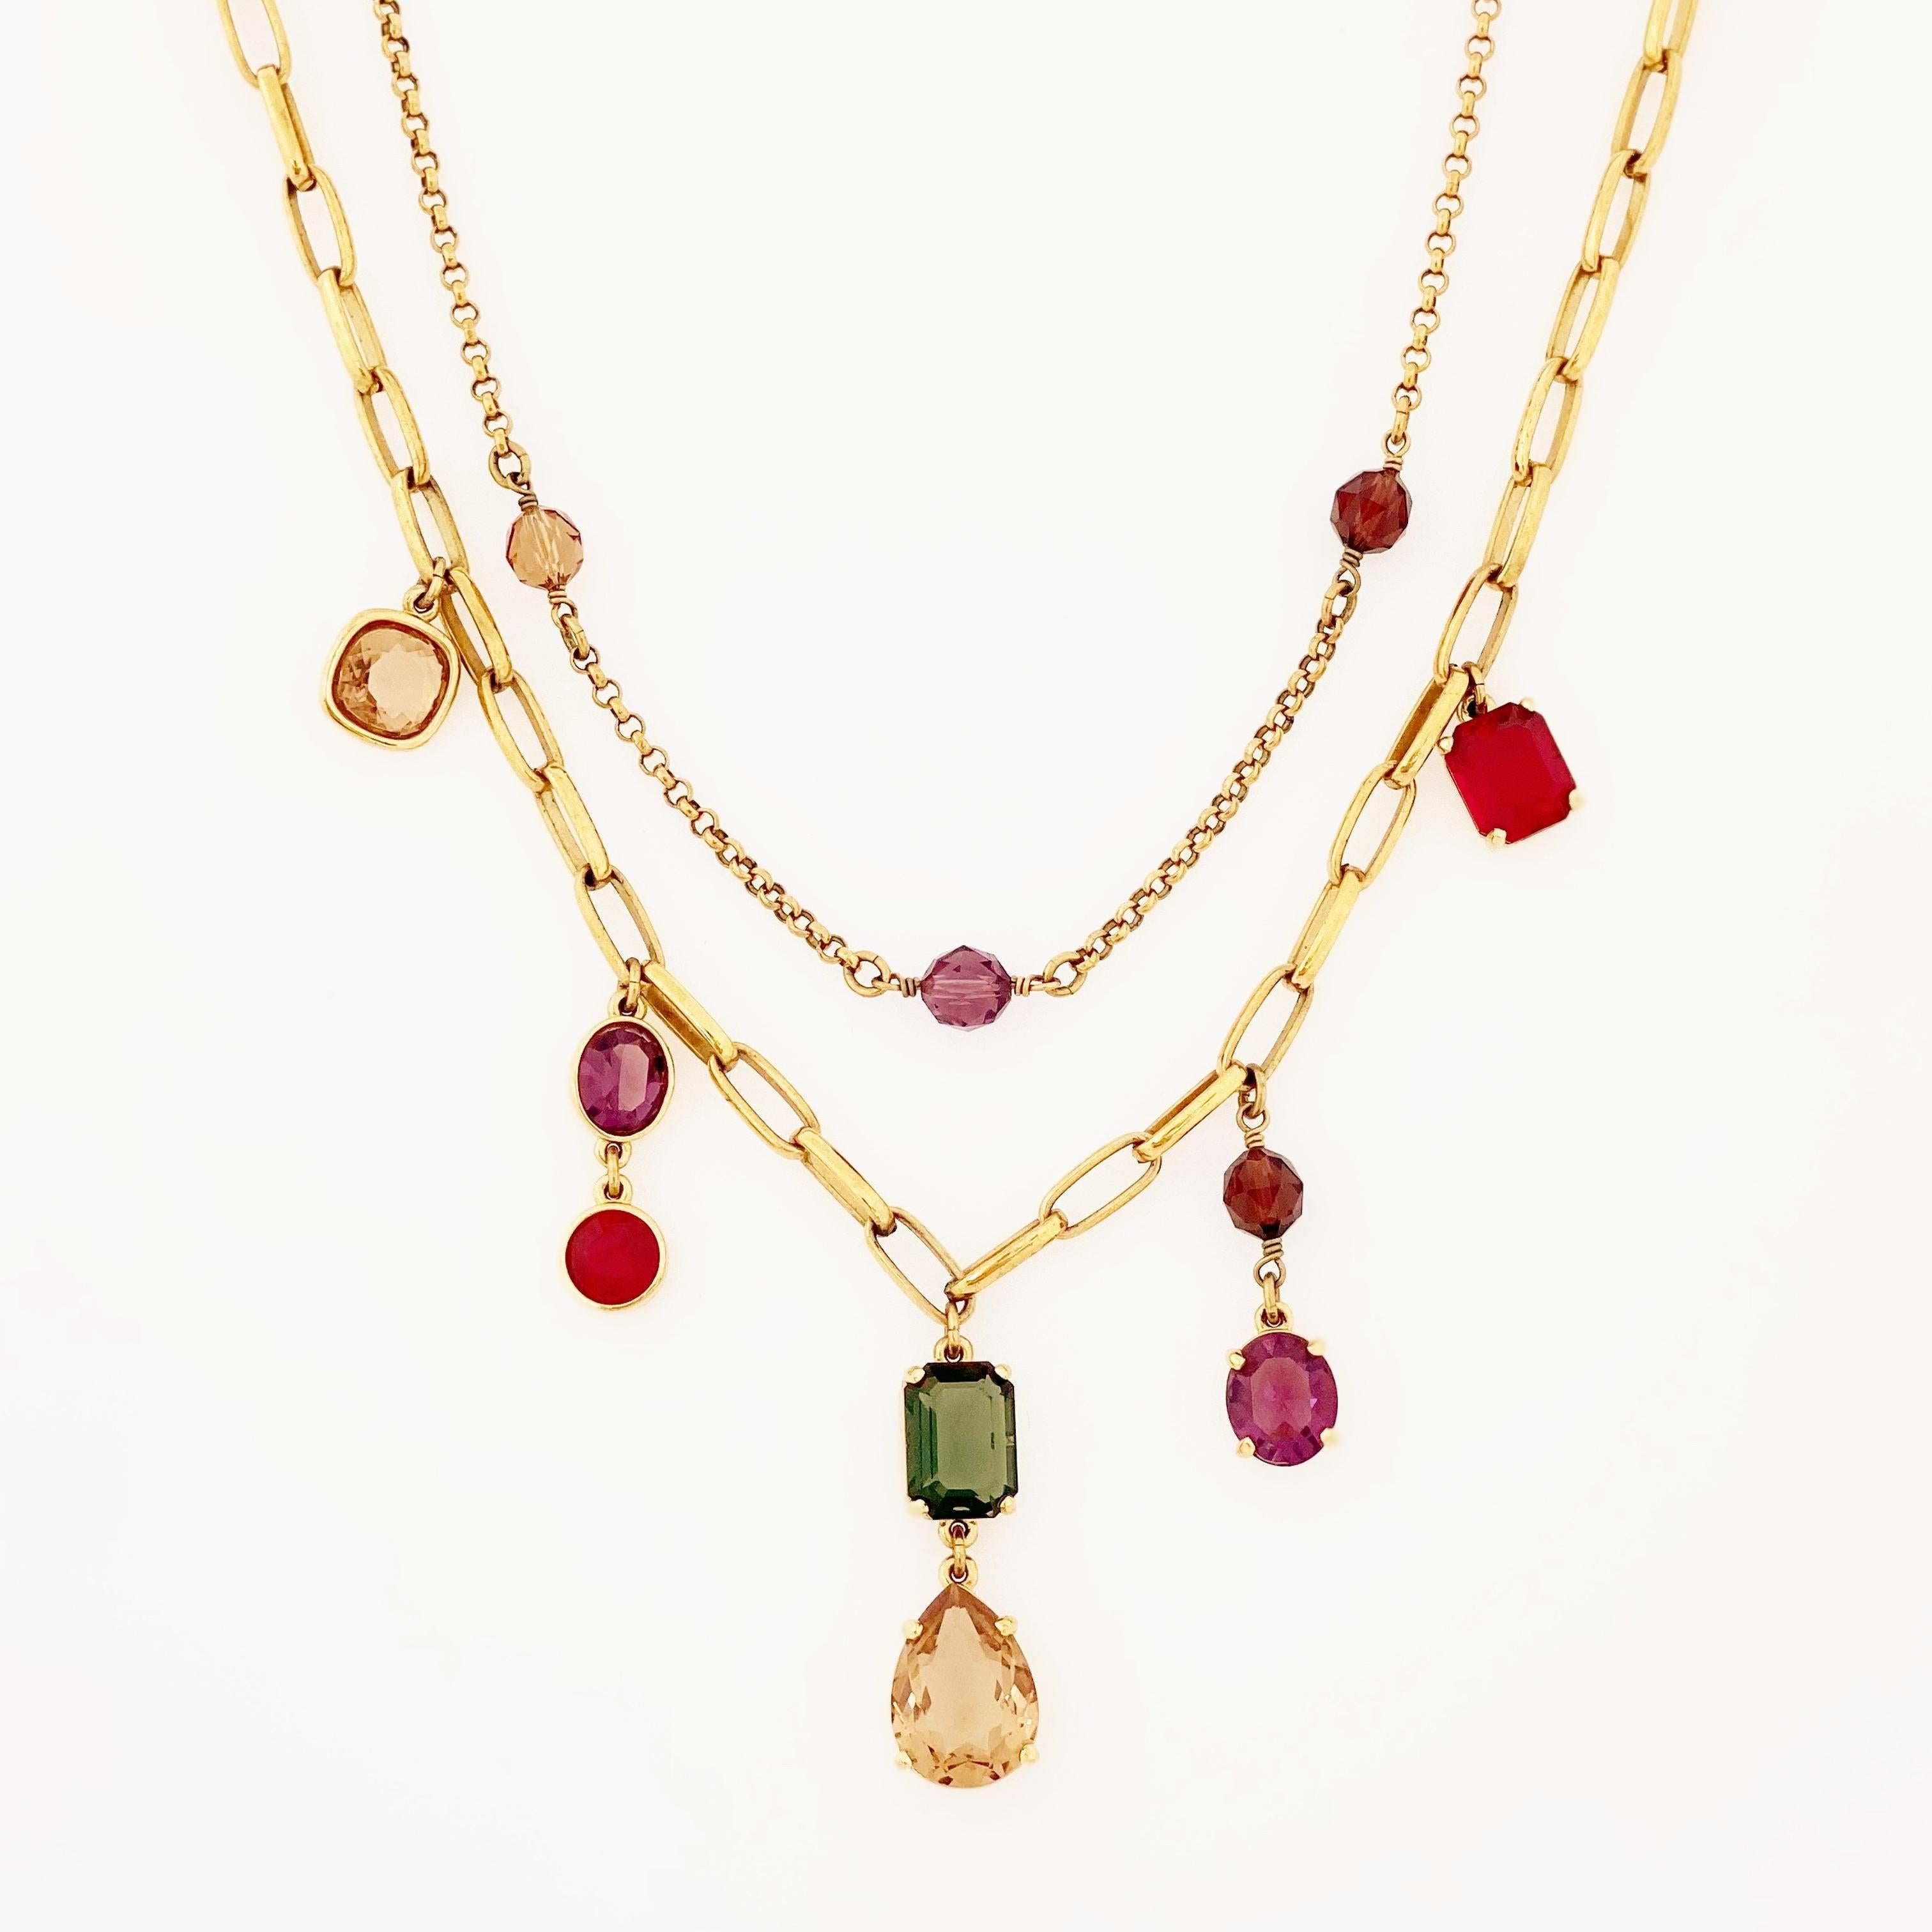 Double Strand Gold Chain Necklace With Jewel Tone Crystals By Swarovski,  1980s For Sale at 1stDibs